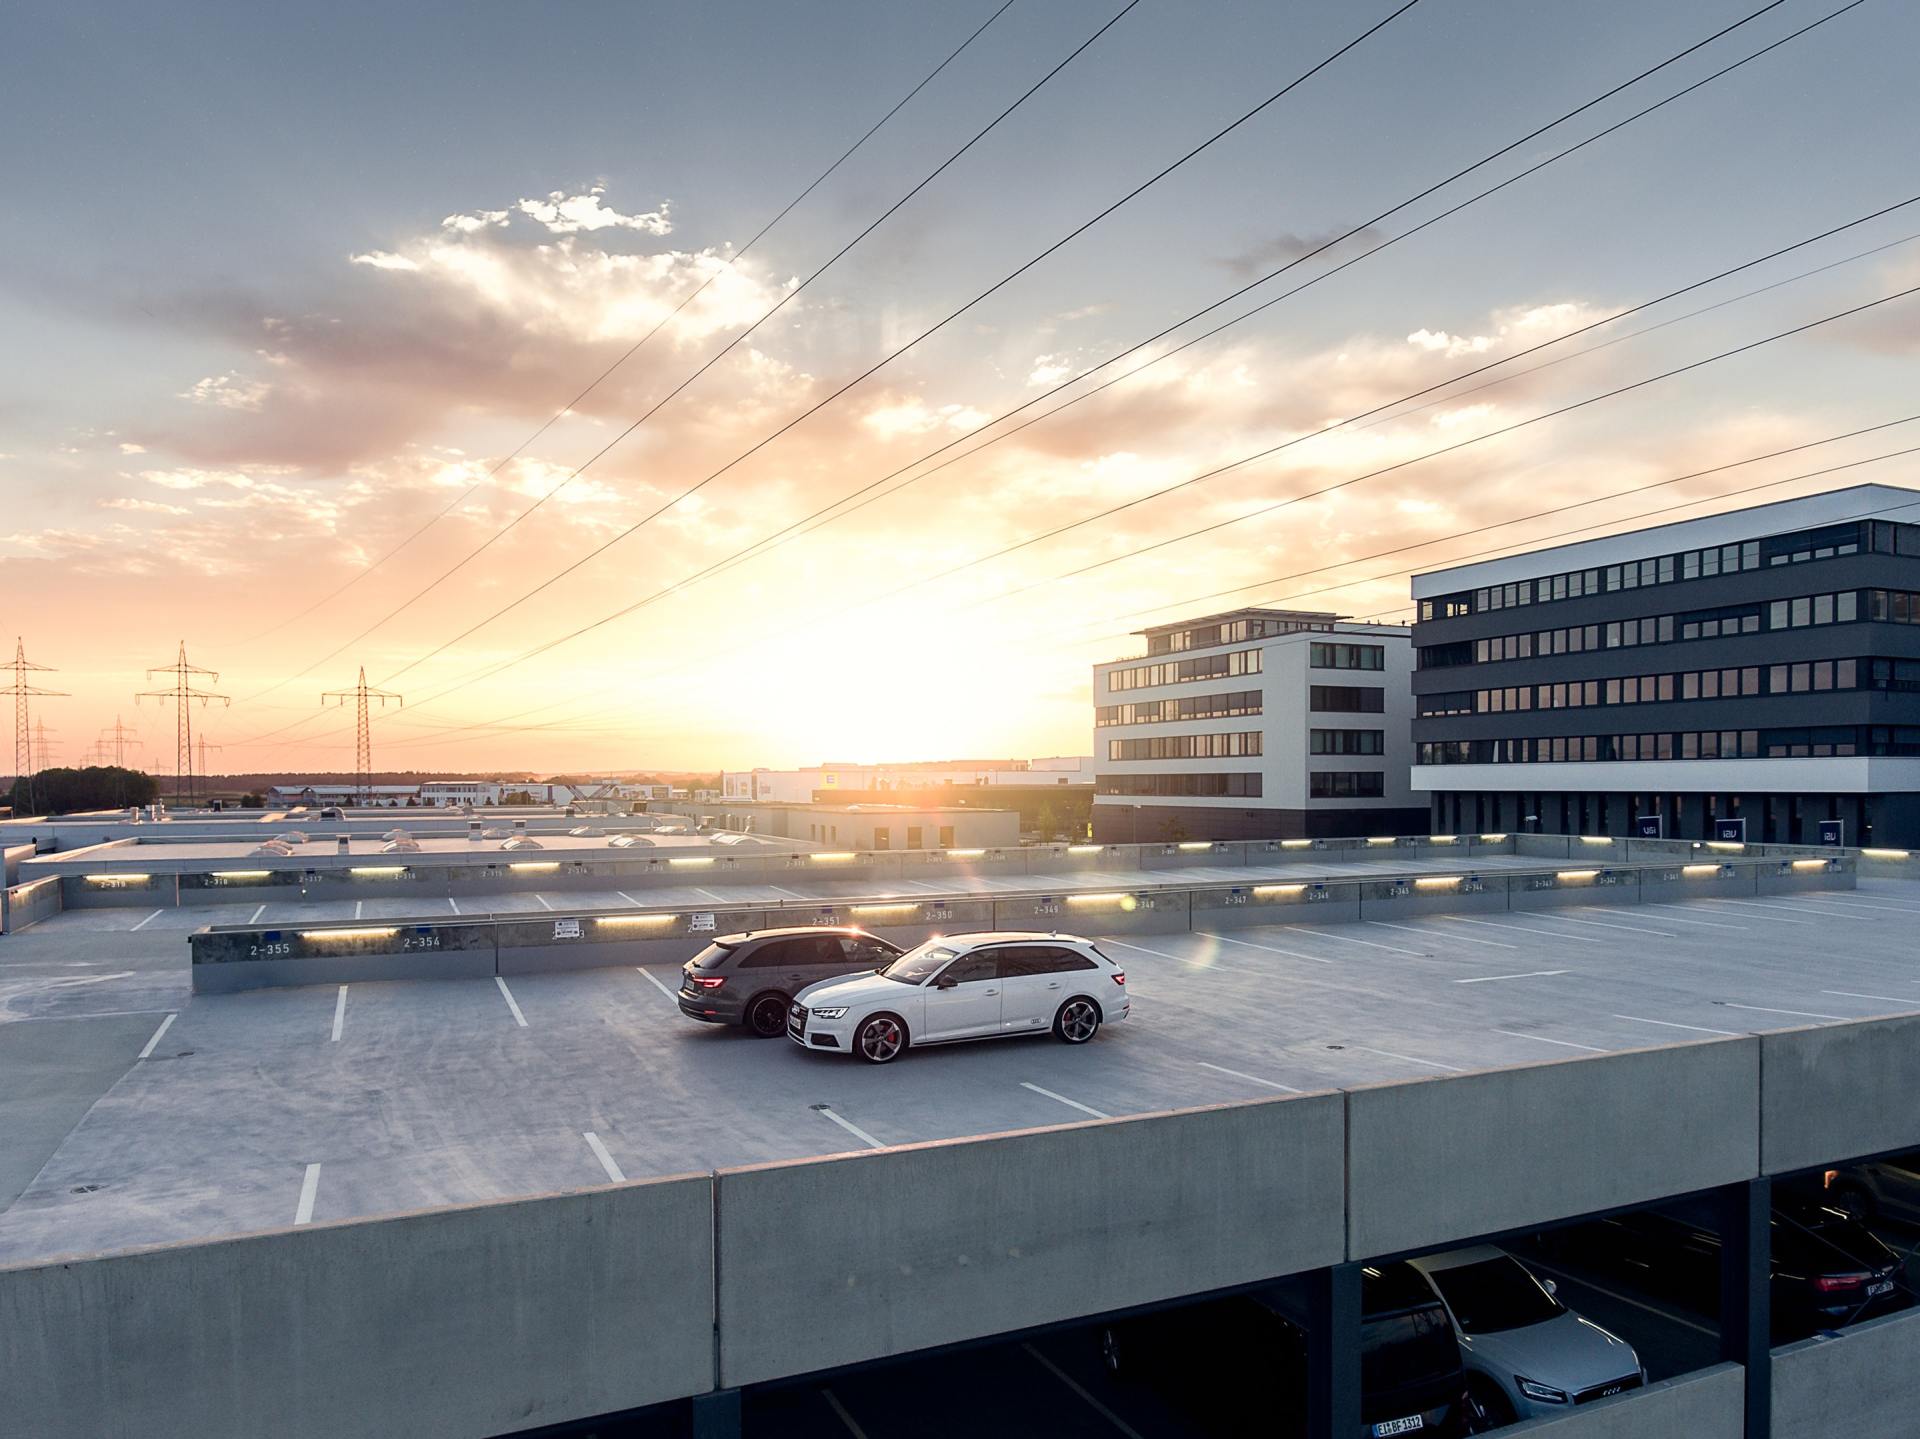 a parking garage with cars parked on the roof at sunset .